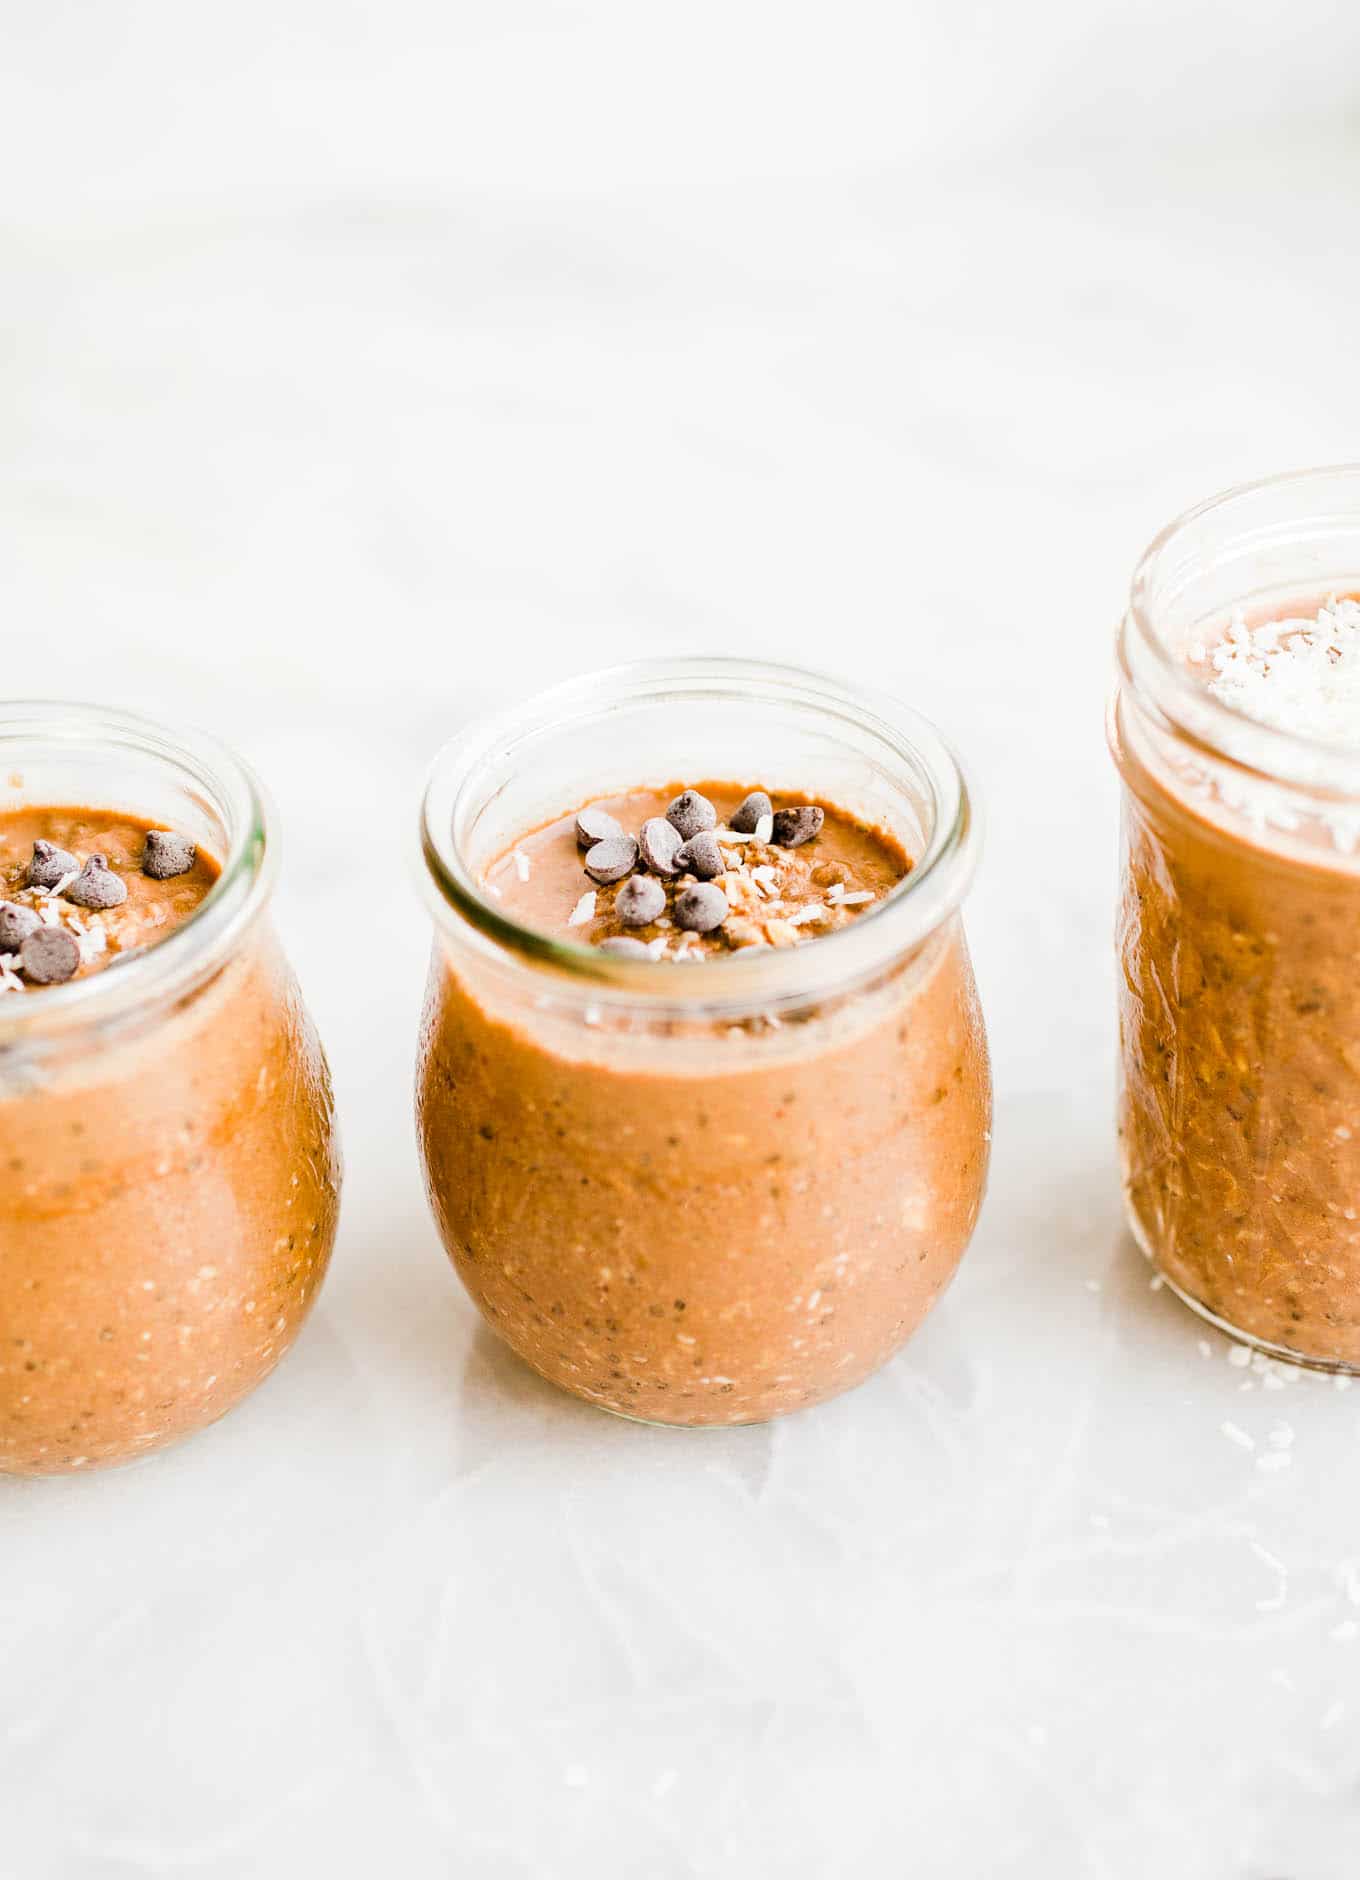 Chocolate peanut butter overnight oats with mini chocolate chips on top divided amongst three small glass jars.